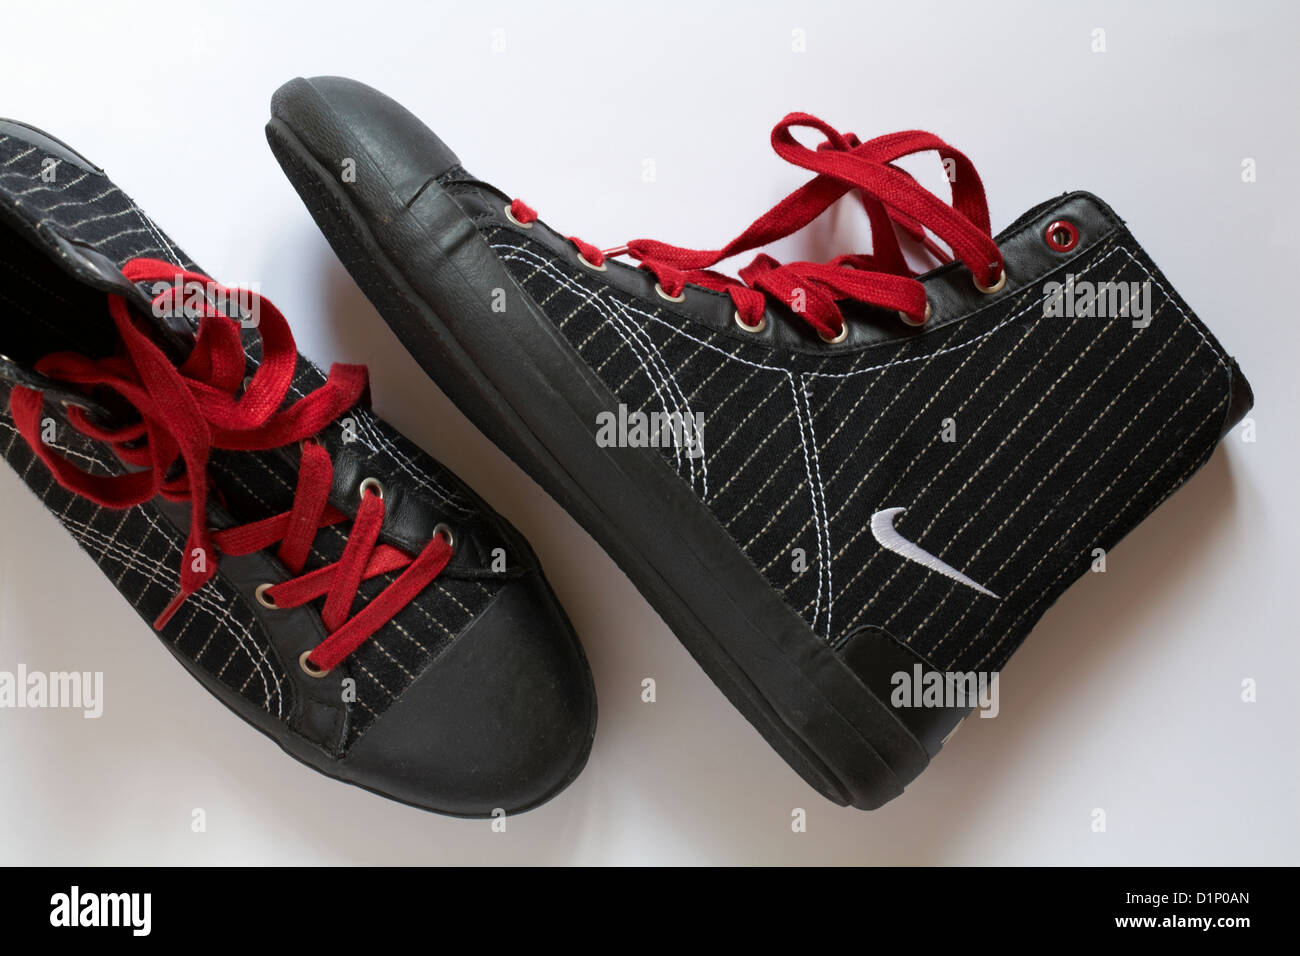 Pair of boots with Nike logo and red laces set on white background Stock  Photo - Alamy